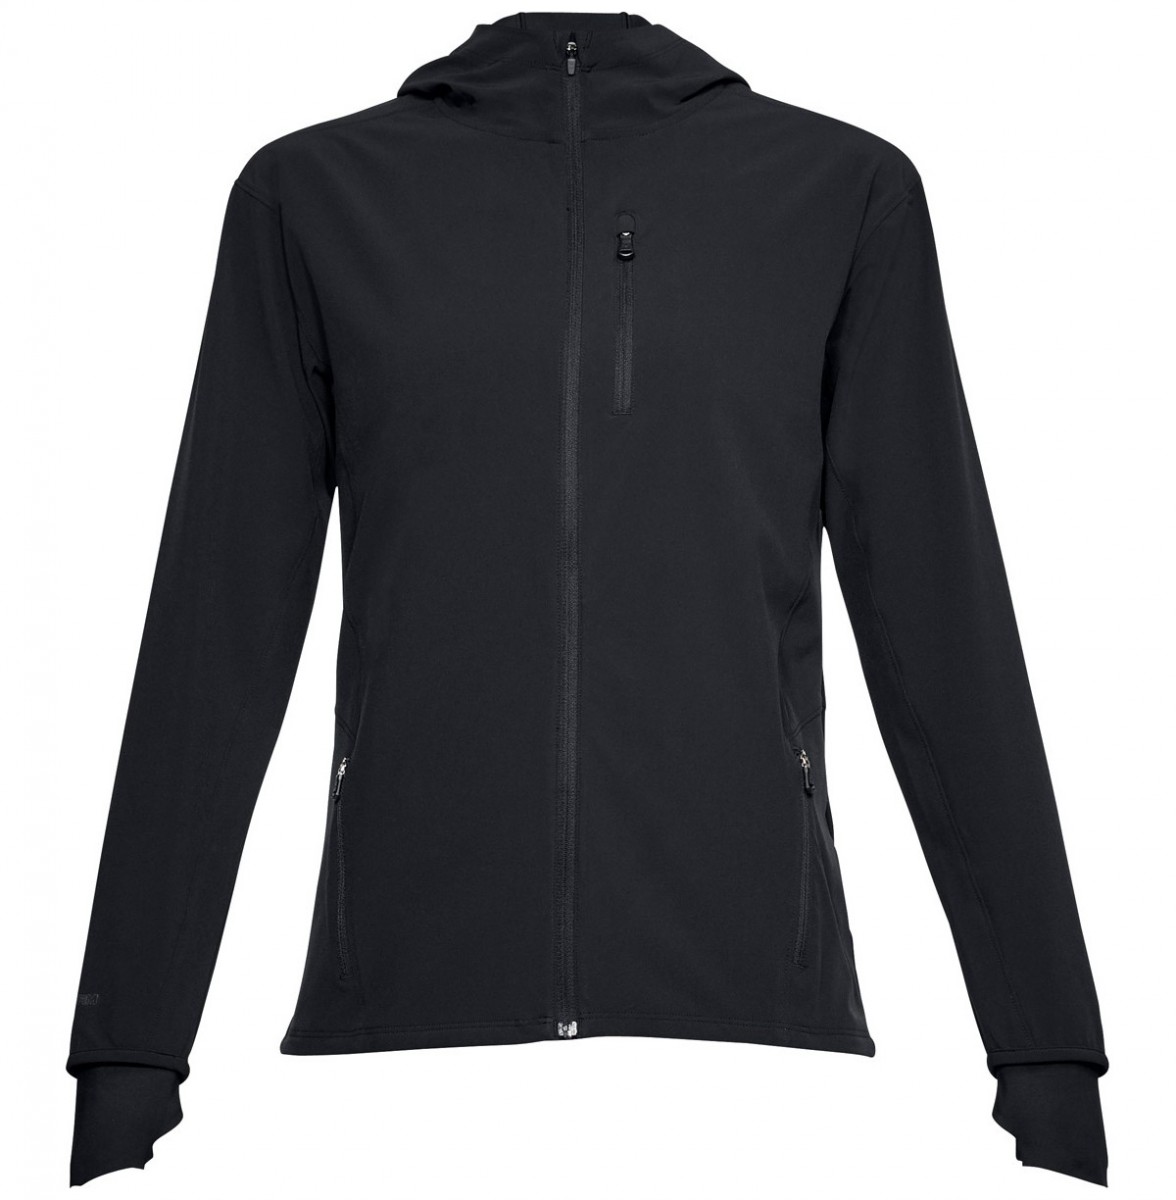 Under Armour Outrun The Storm Women's Running Jacket - Black